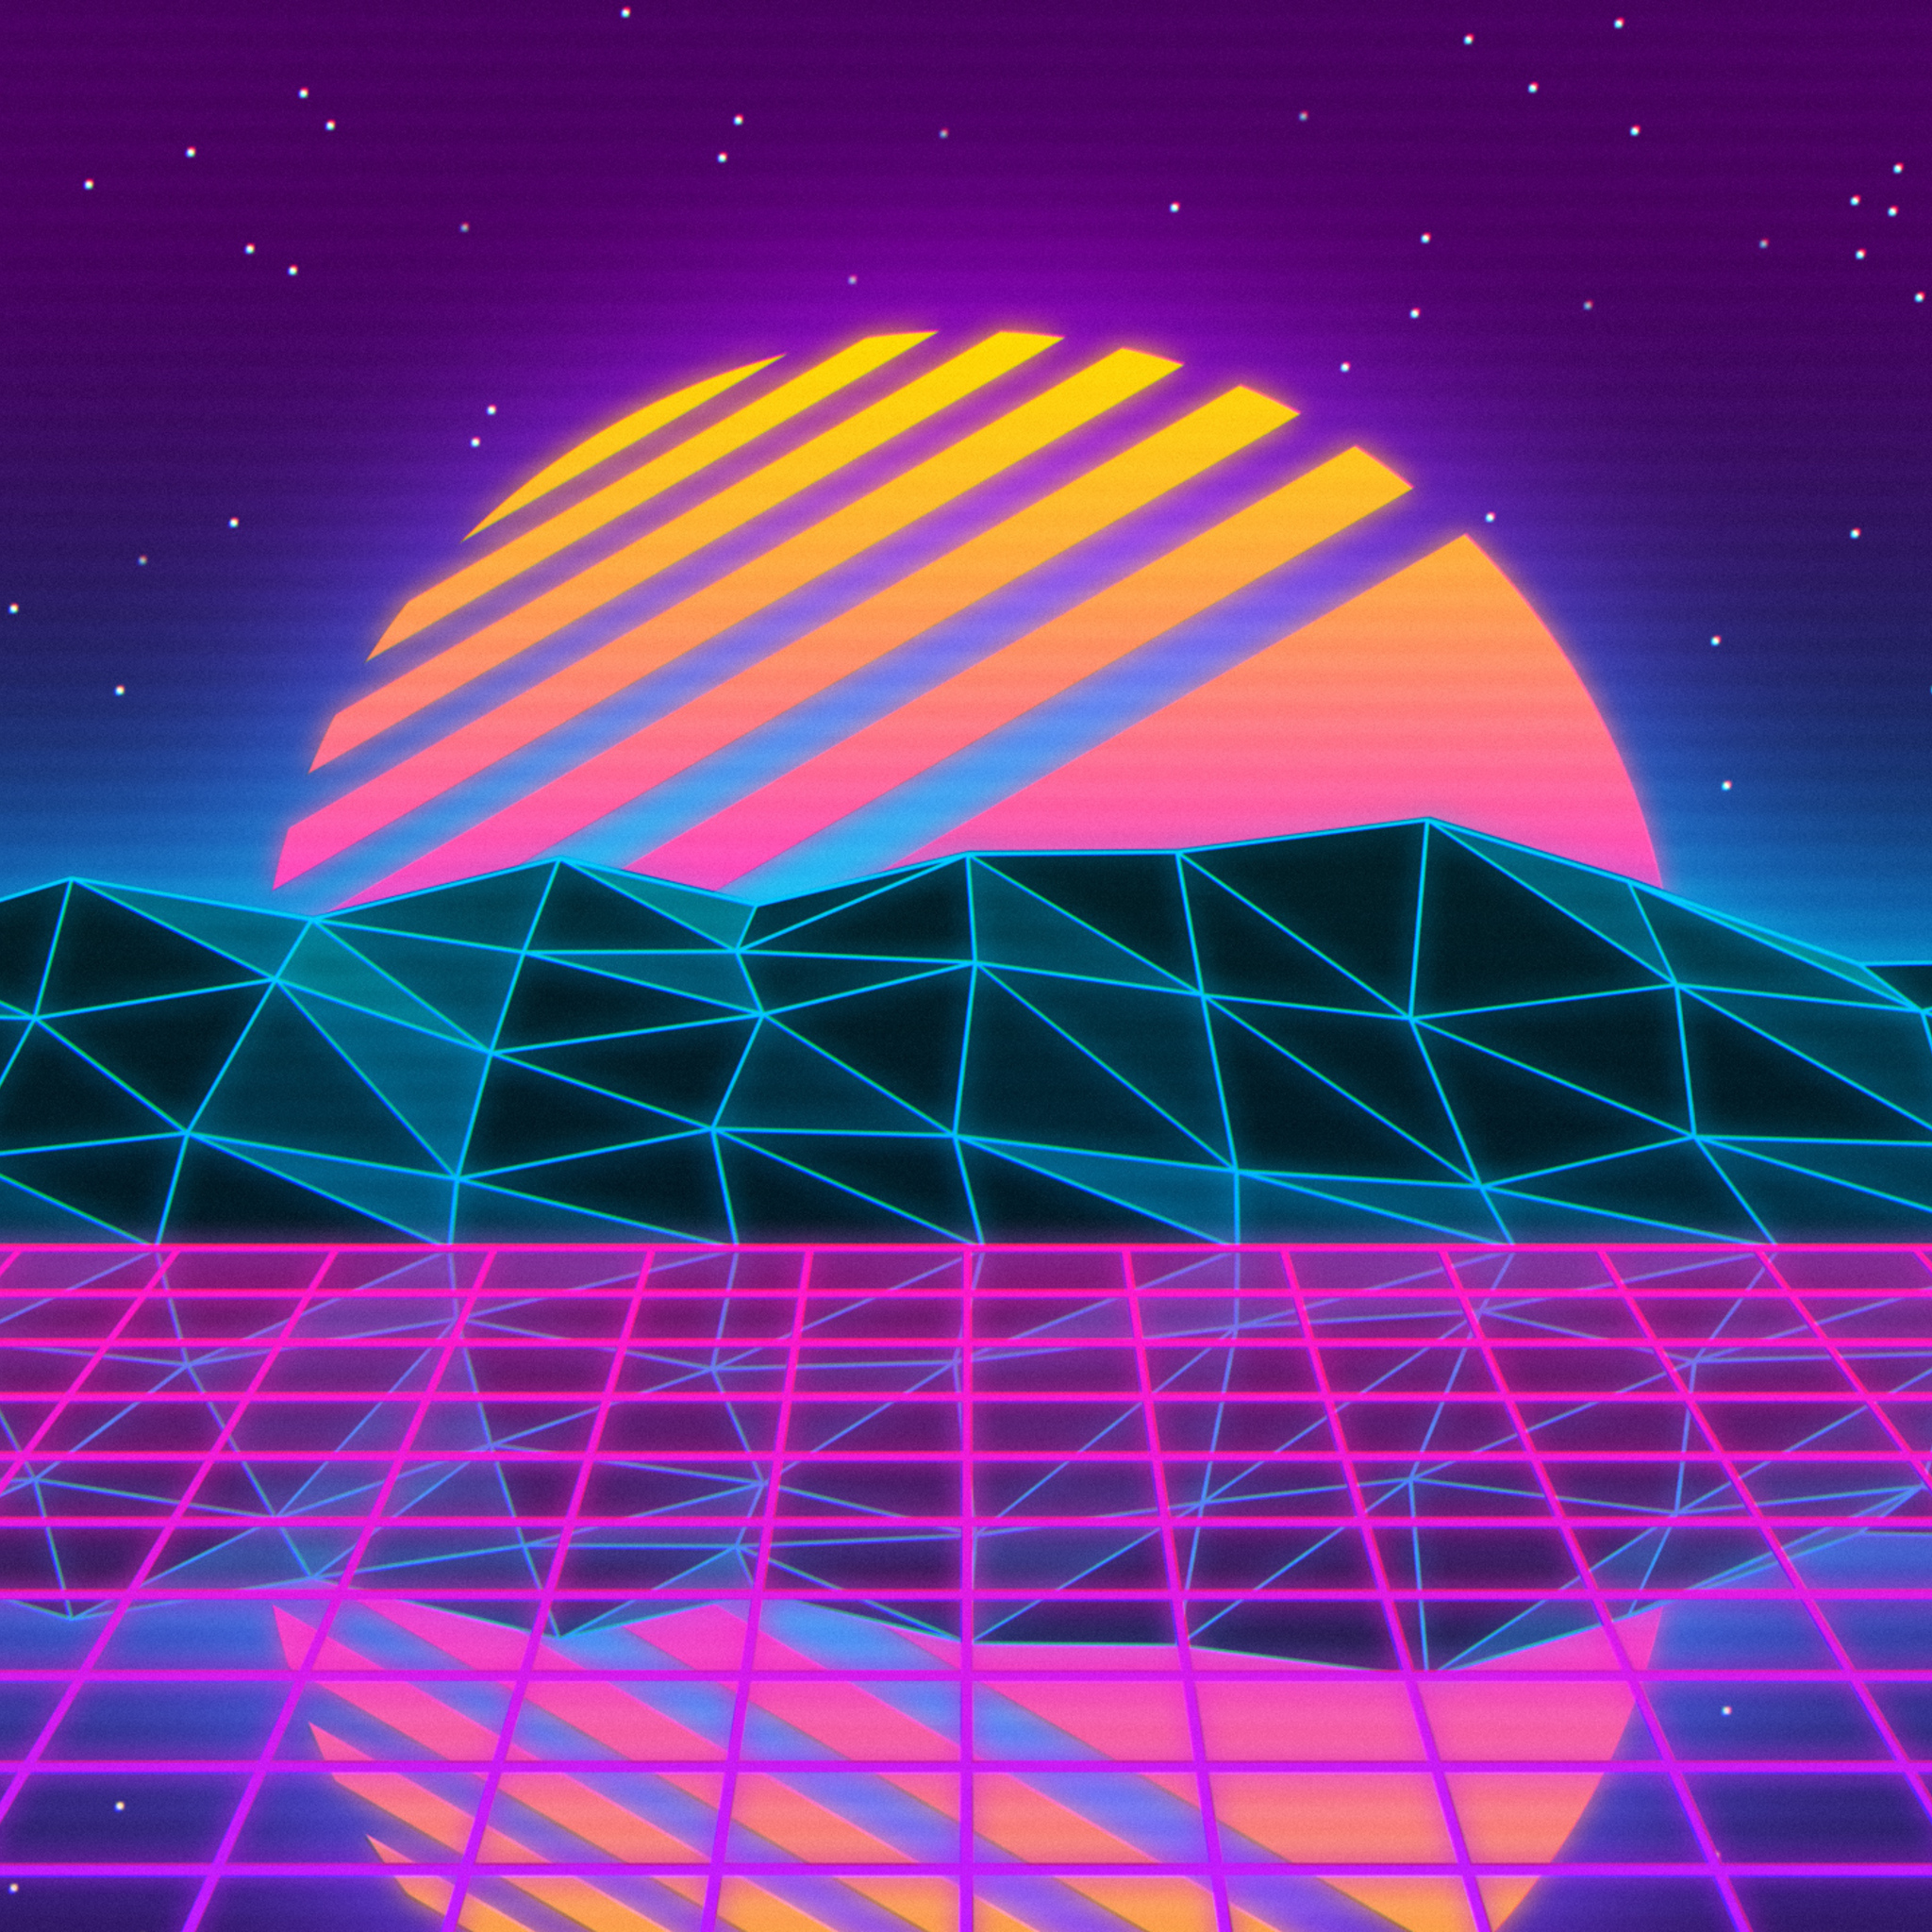 48x48 Vaporwave Ipad Air Hd 4k Wallpapers Images Backgrounds Photos And Pictures